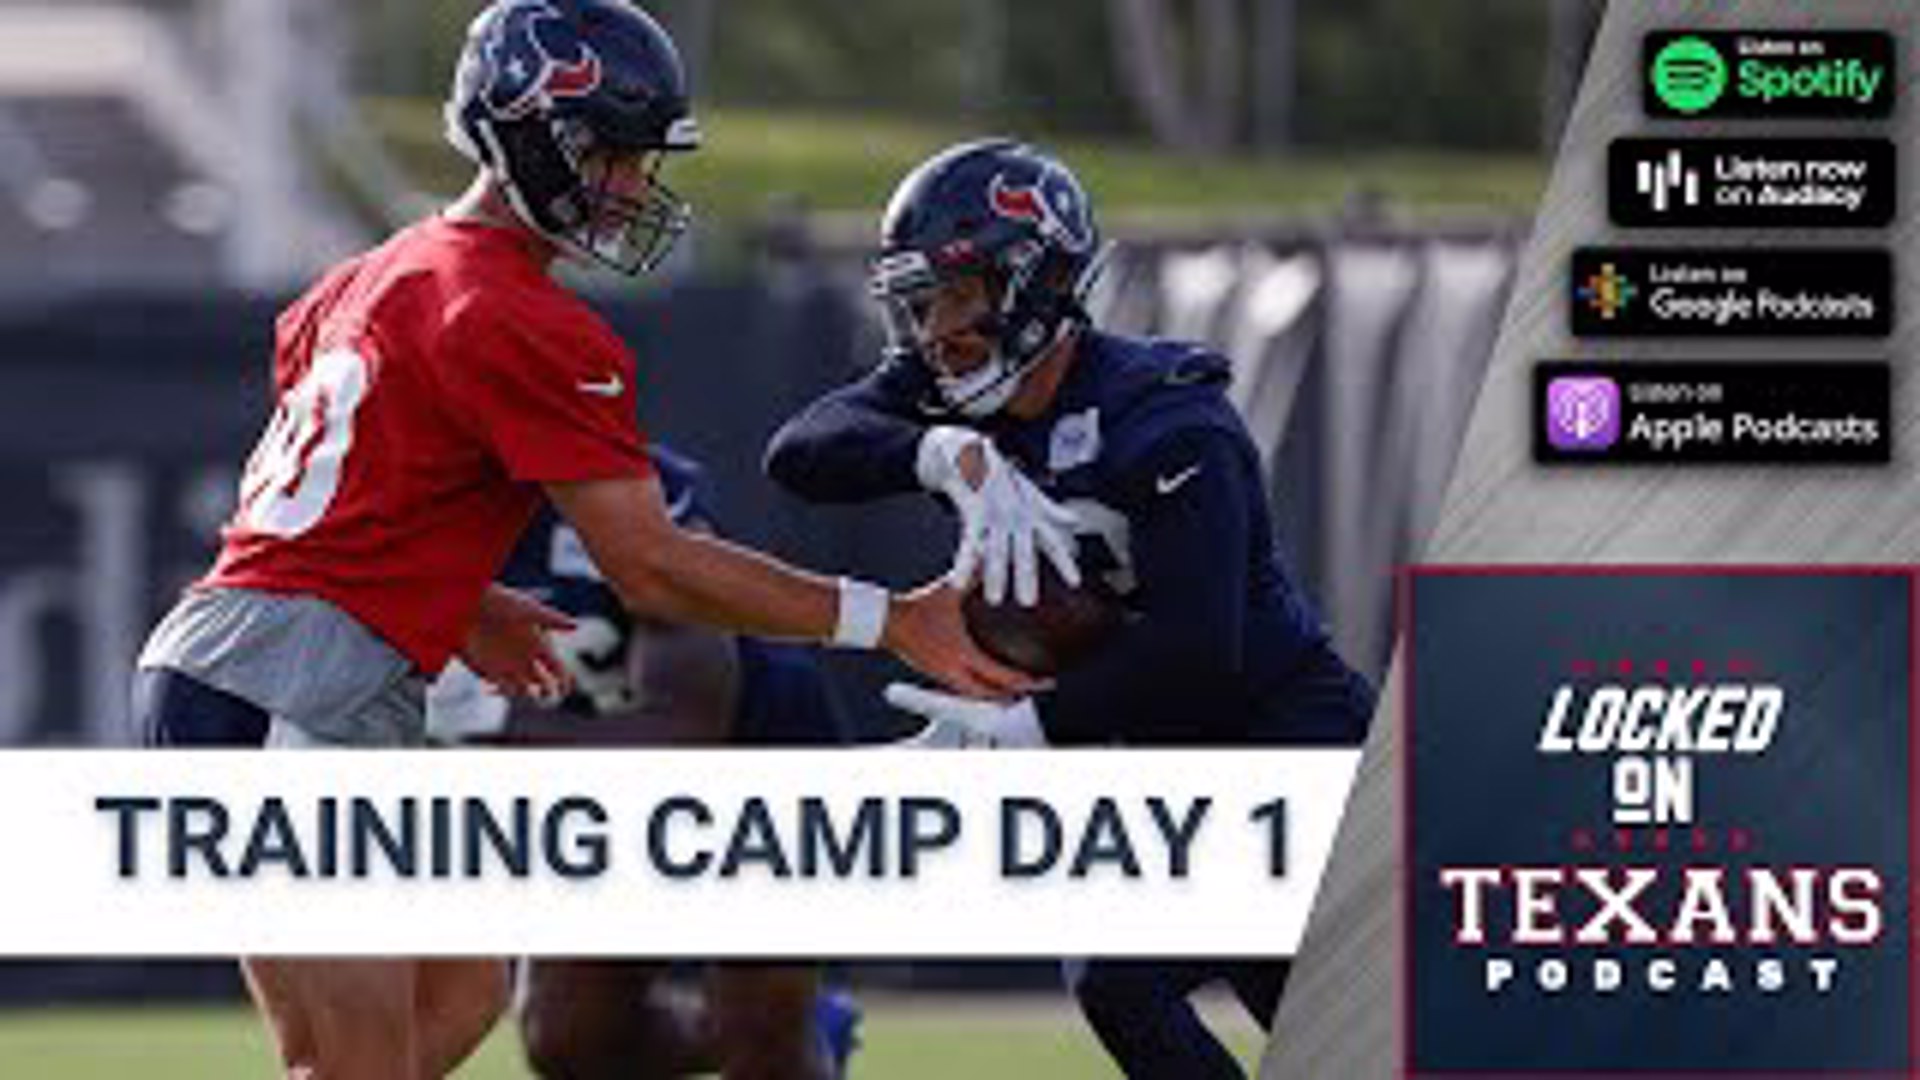 The Houston Texans opened training camp for the first time ahead of the 2022 season on Friday.